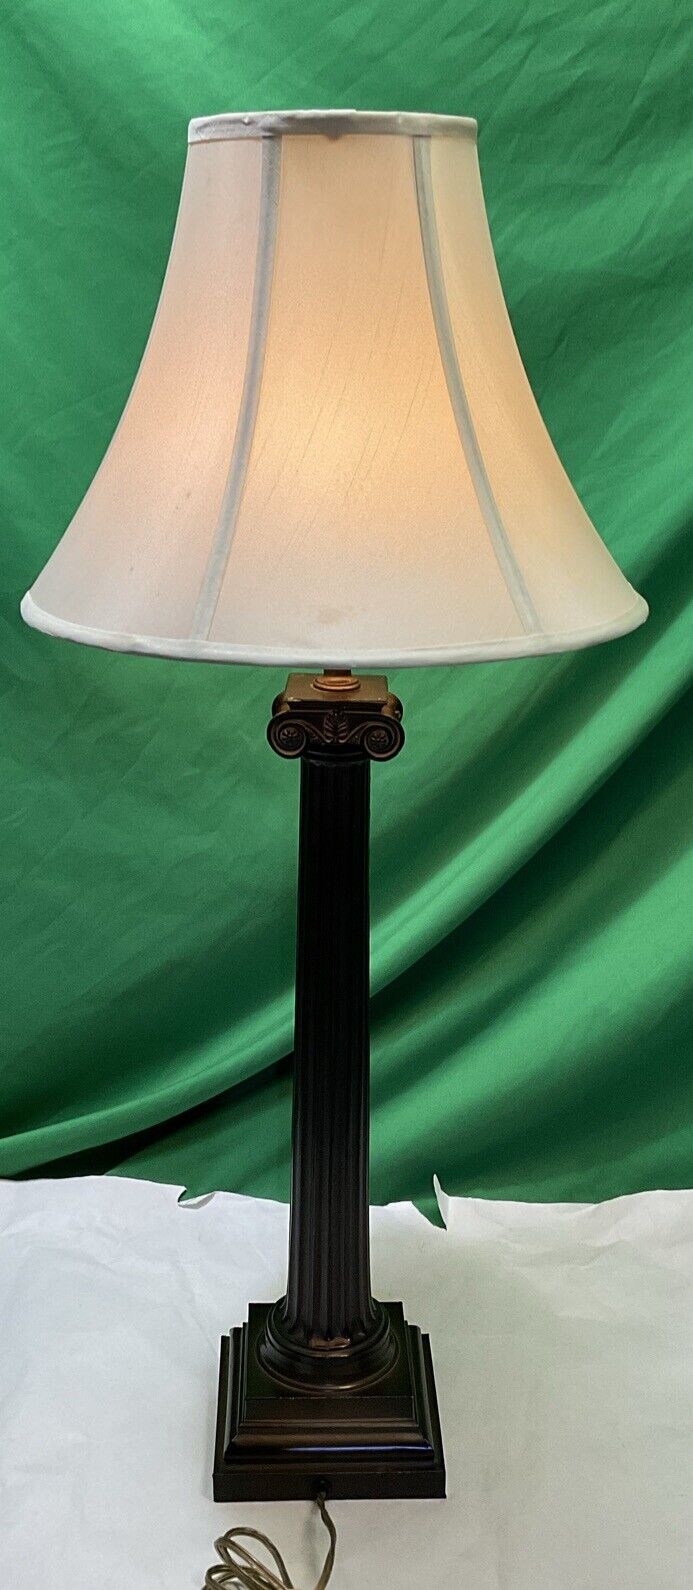 Vintage Metal Column Table Lamp With Shade 32” Tall, Brown Color